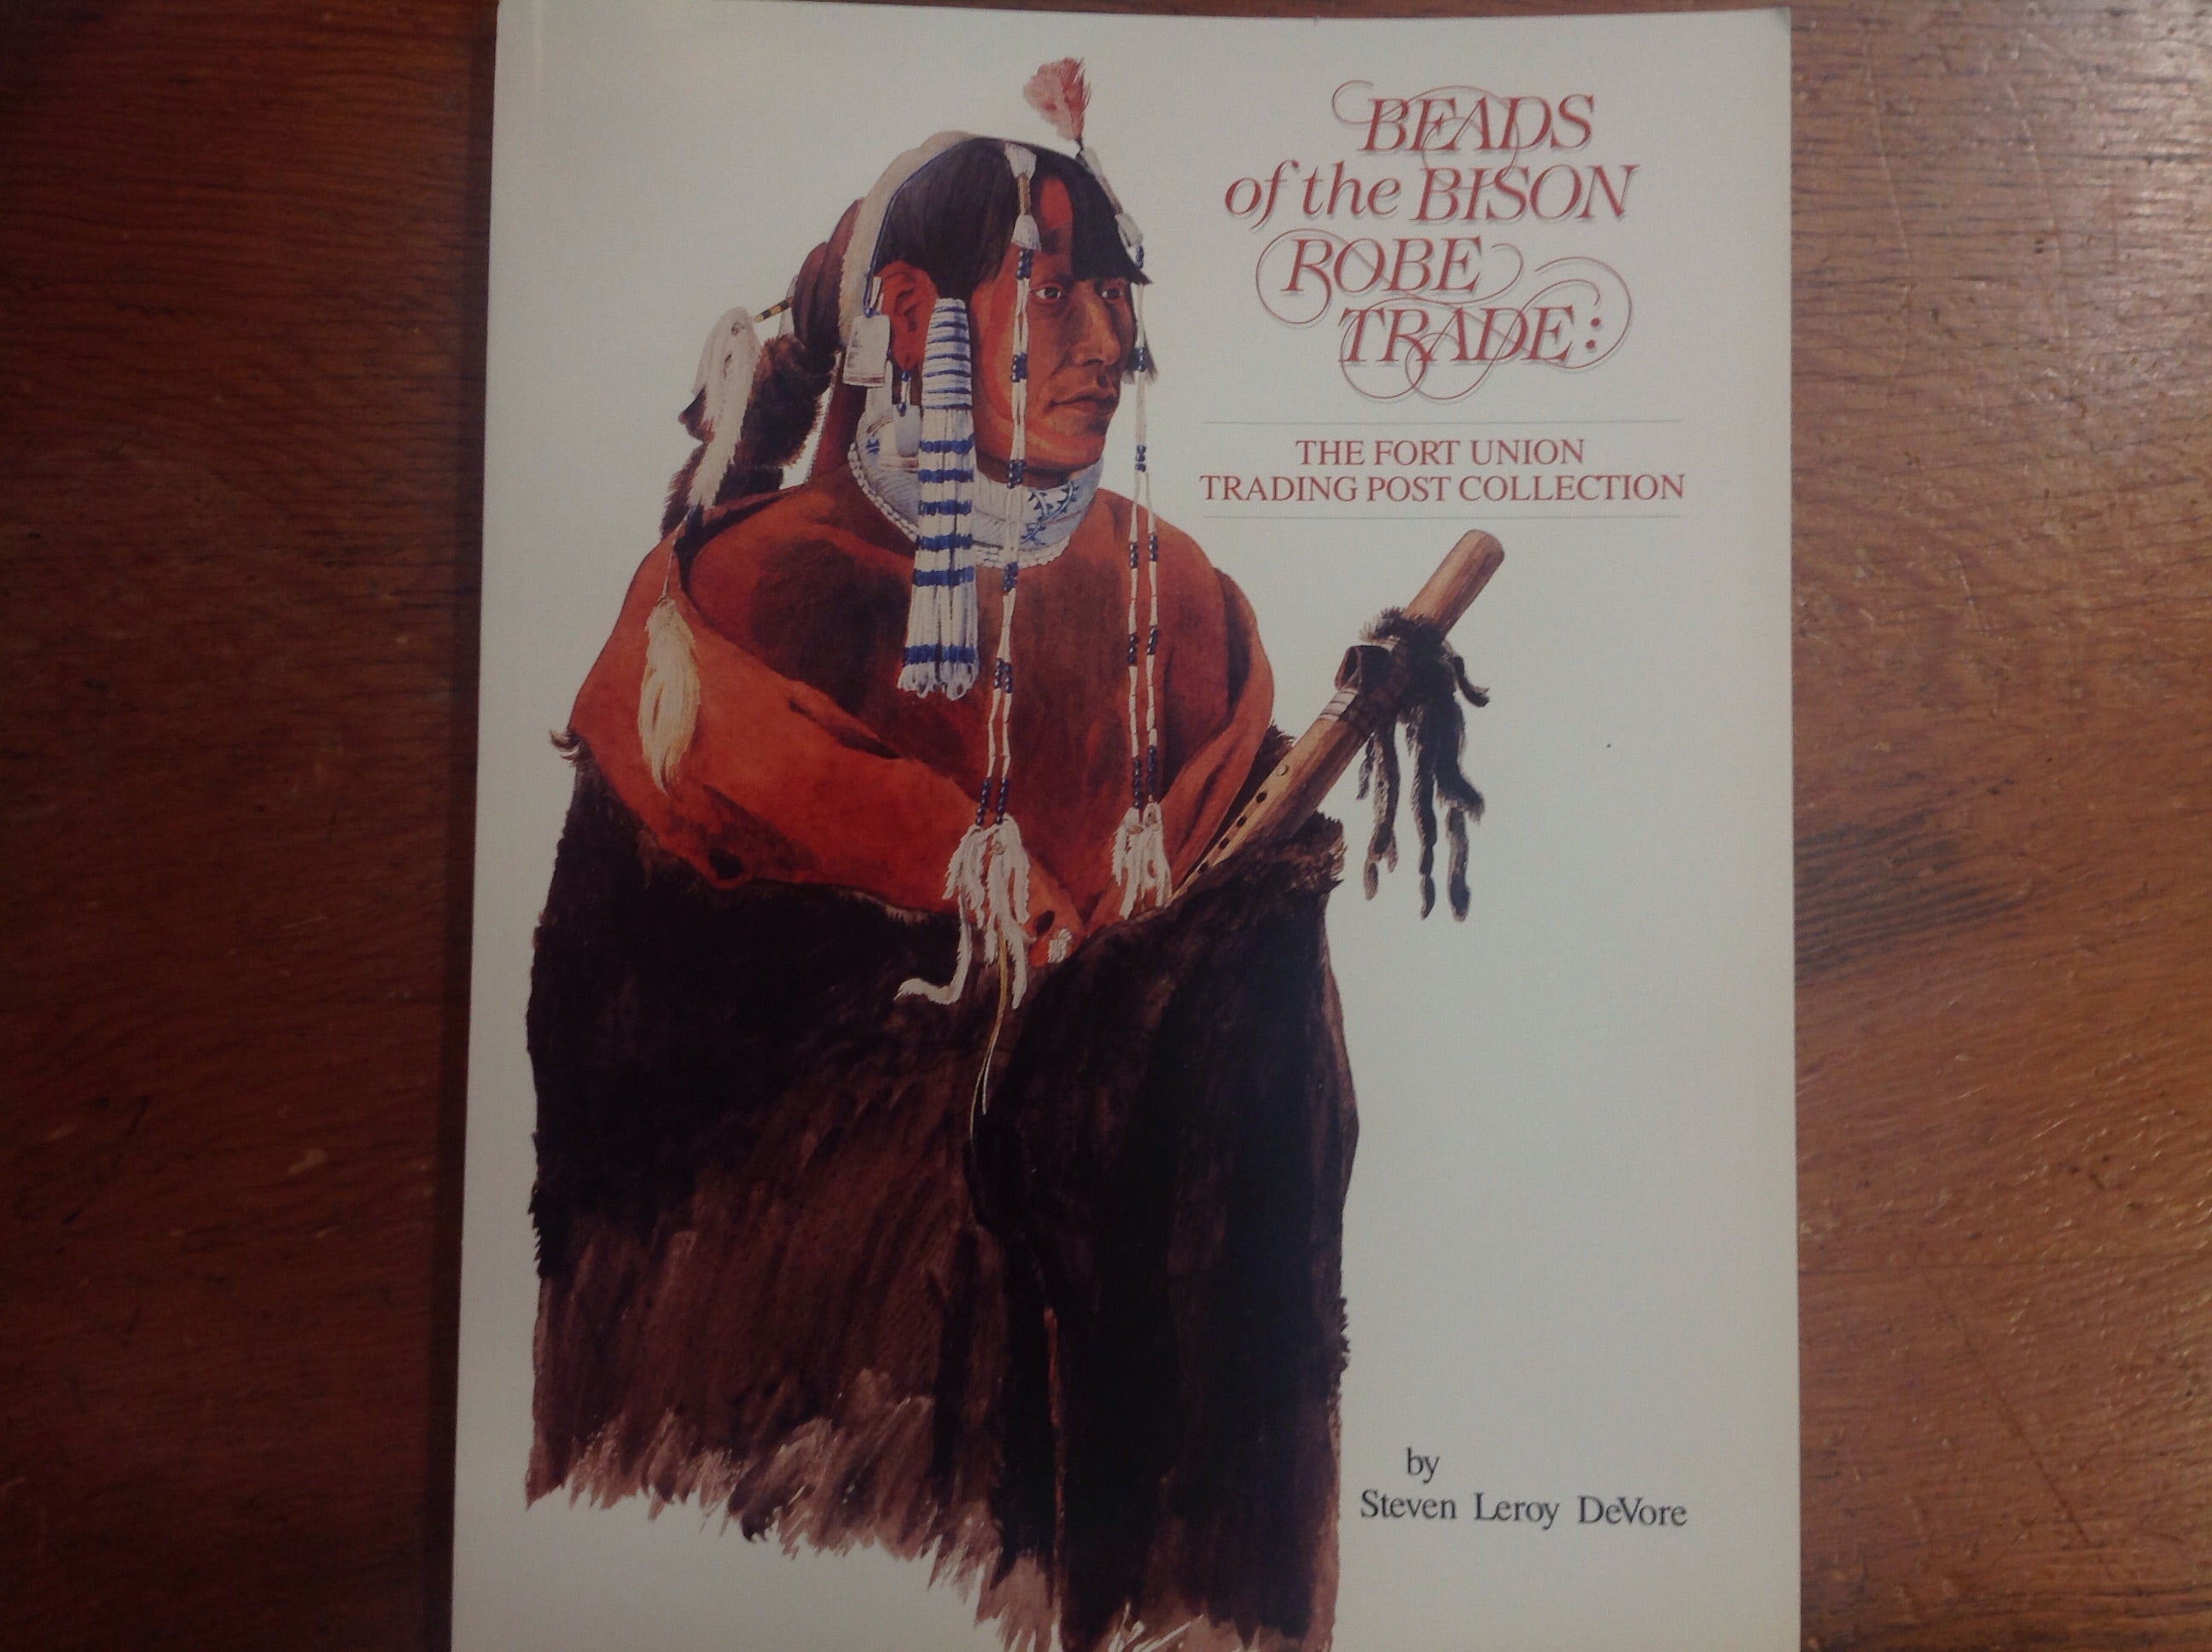 BOOKS - Beads of the Bison Robe Trade